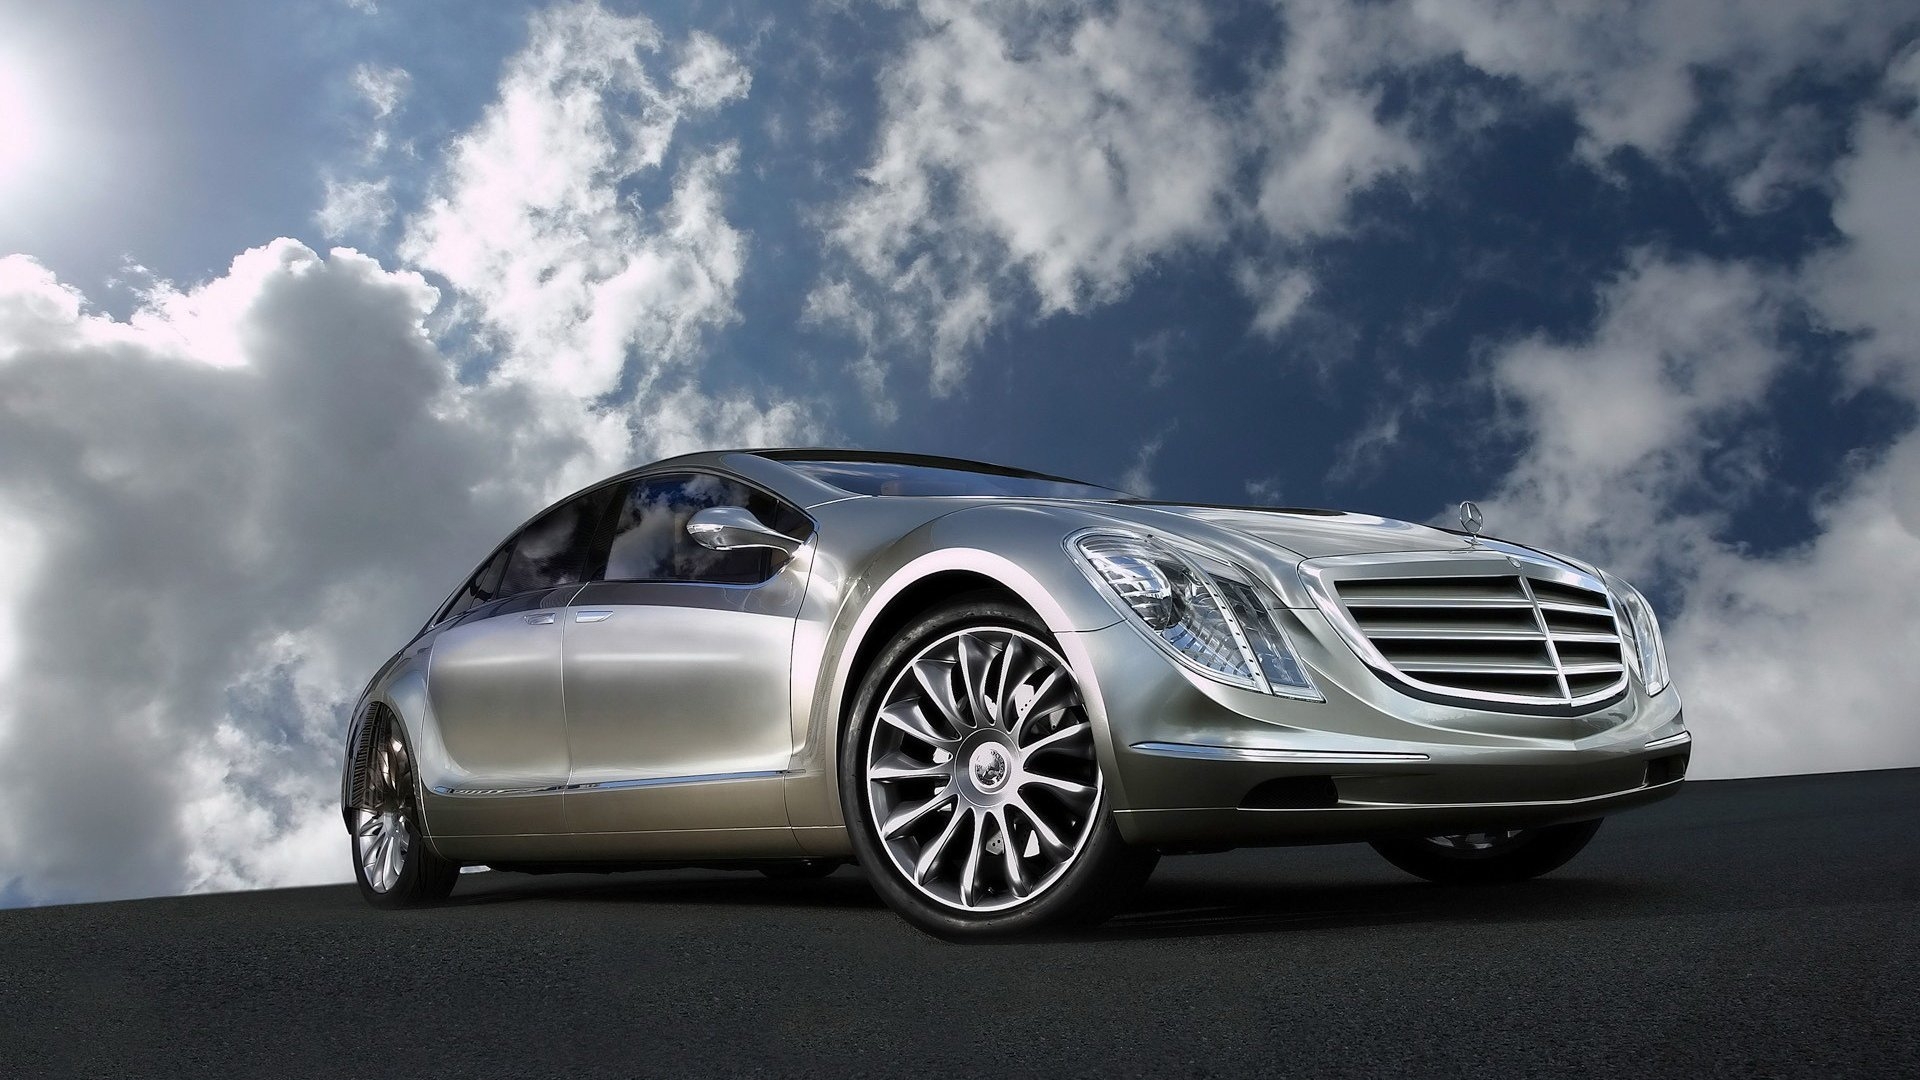 Amazing Mercedes Front Angle for 1920 x 1080 HDTV 1080p resolution